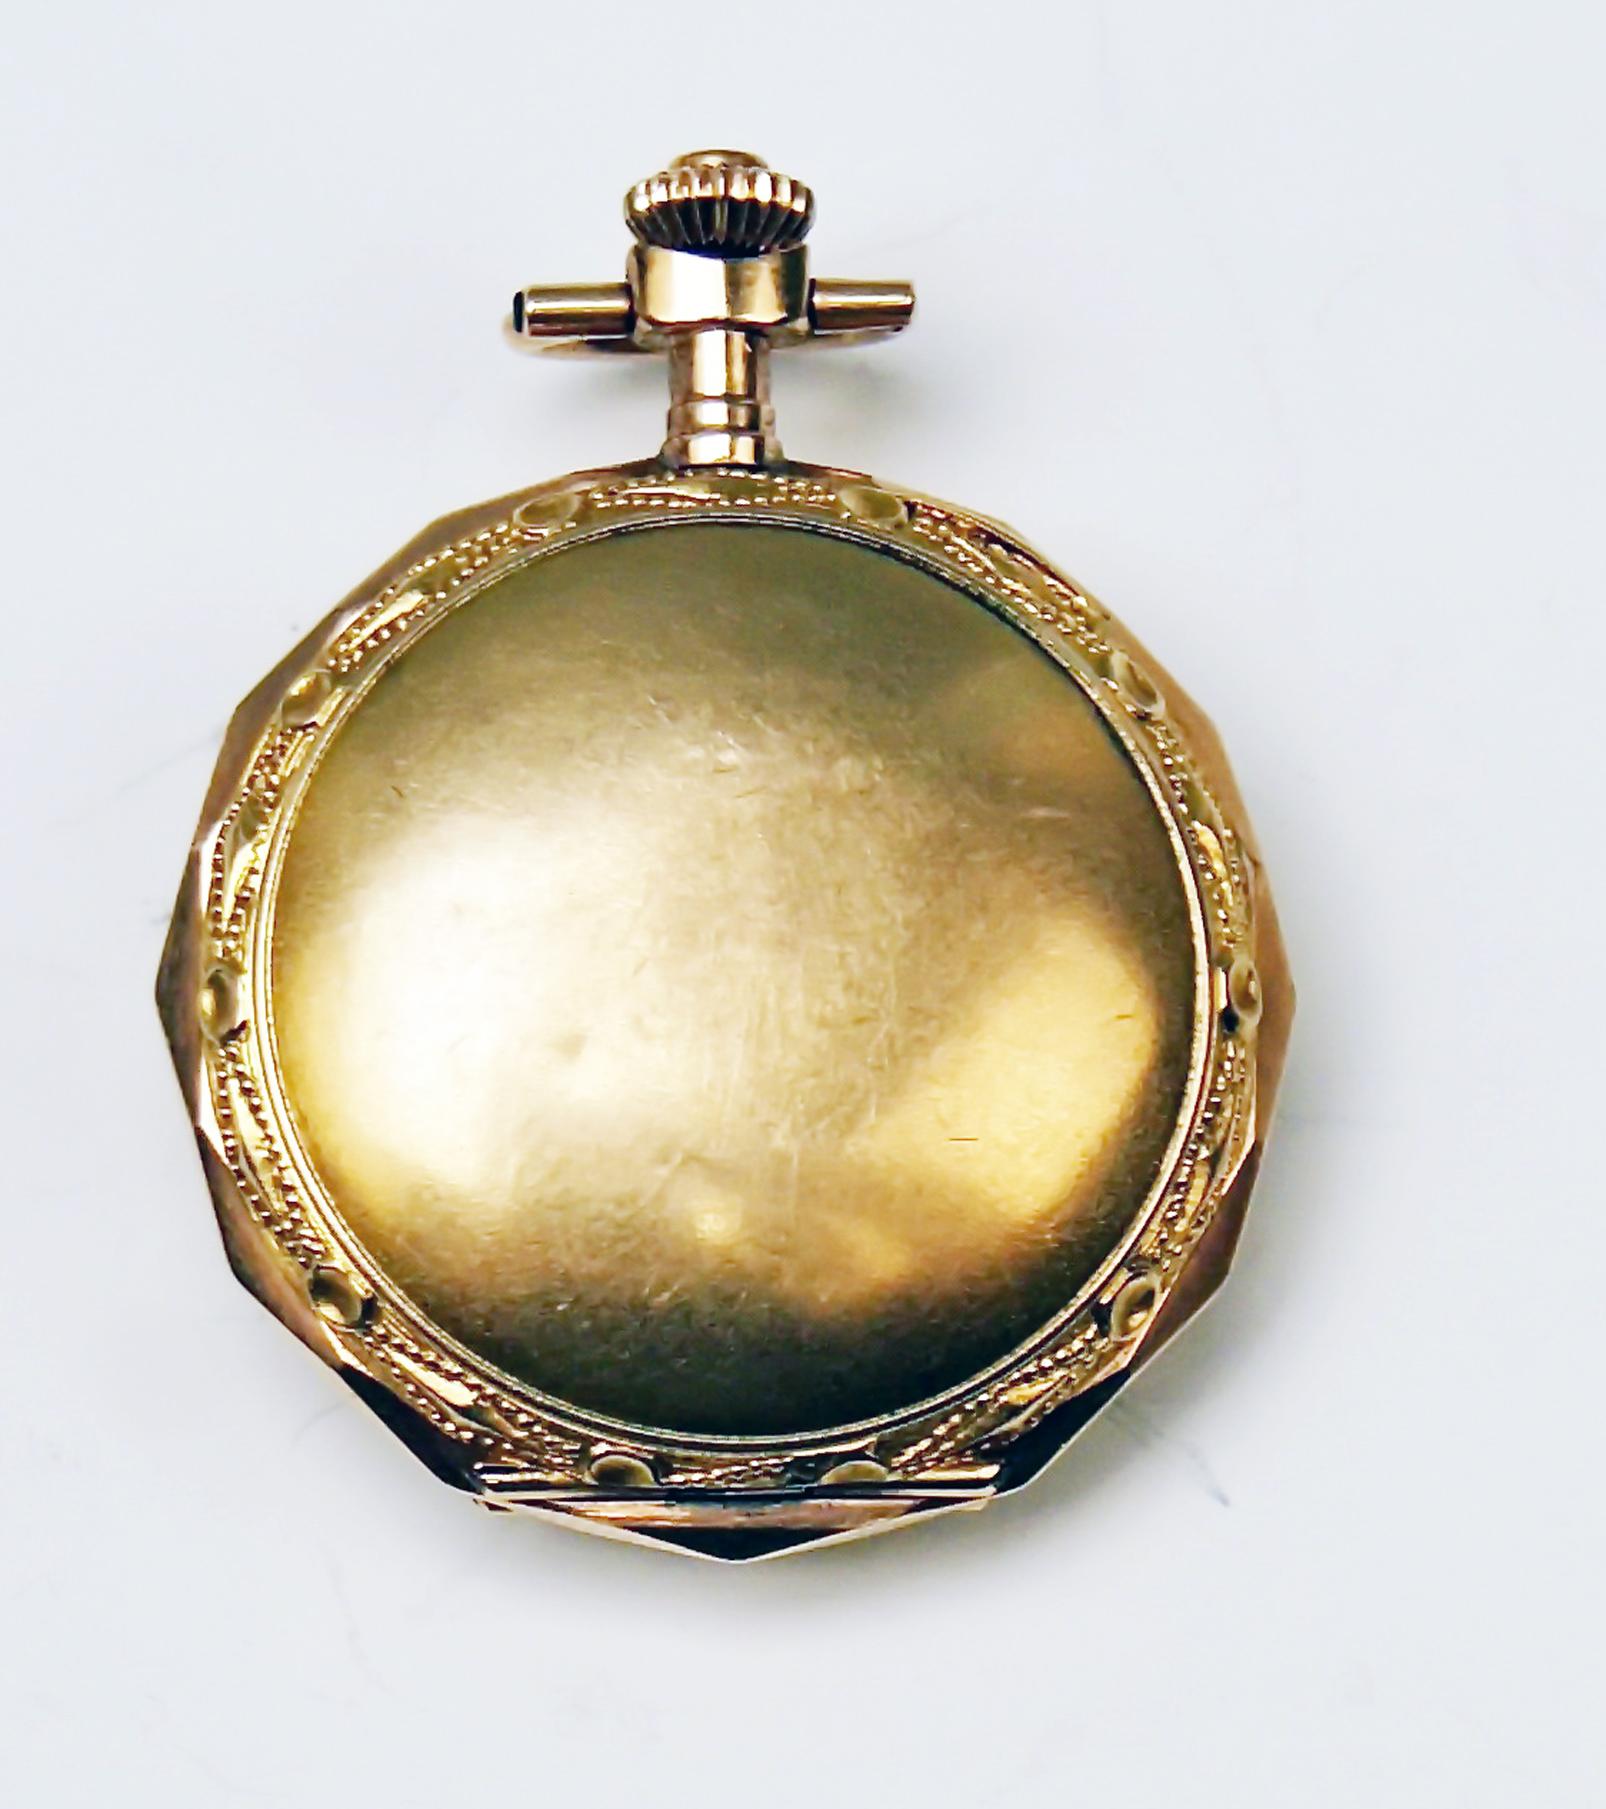 Remontoir Cylindre 10 Rubis Woman's Pocket Watch with three lids.

Made of 14 ct slight red gold, with eight diamonds (= 0,40 ct in total) decorating the clockface covering lid,
all lids made of 14 ct gold
Enamel clockface with Roman